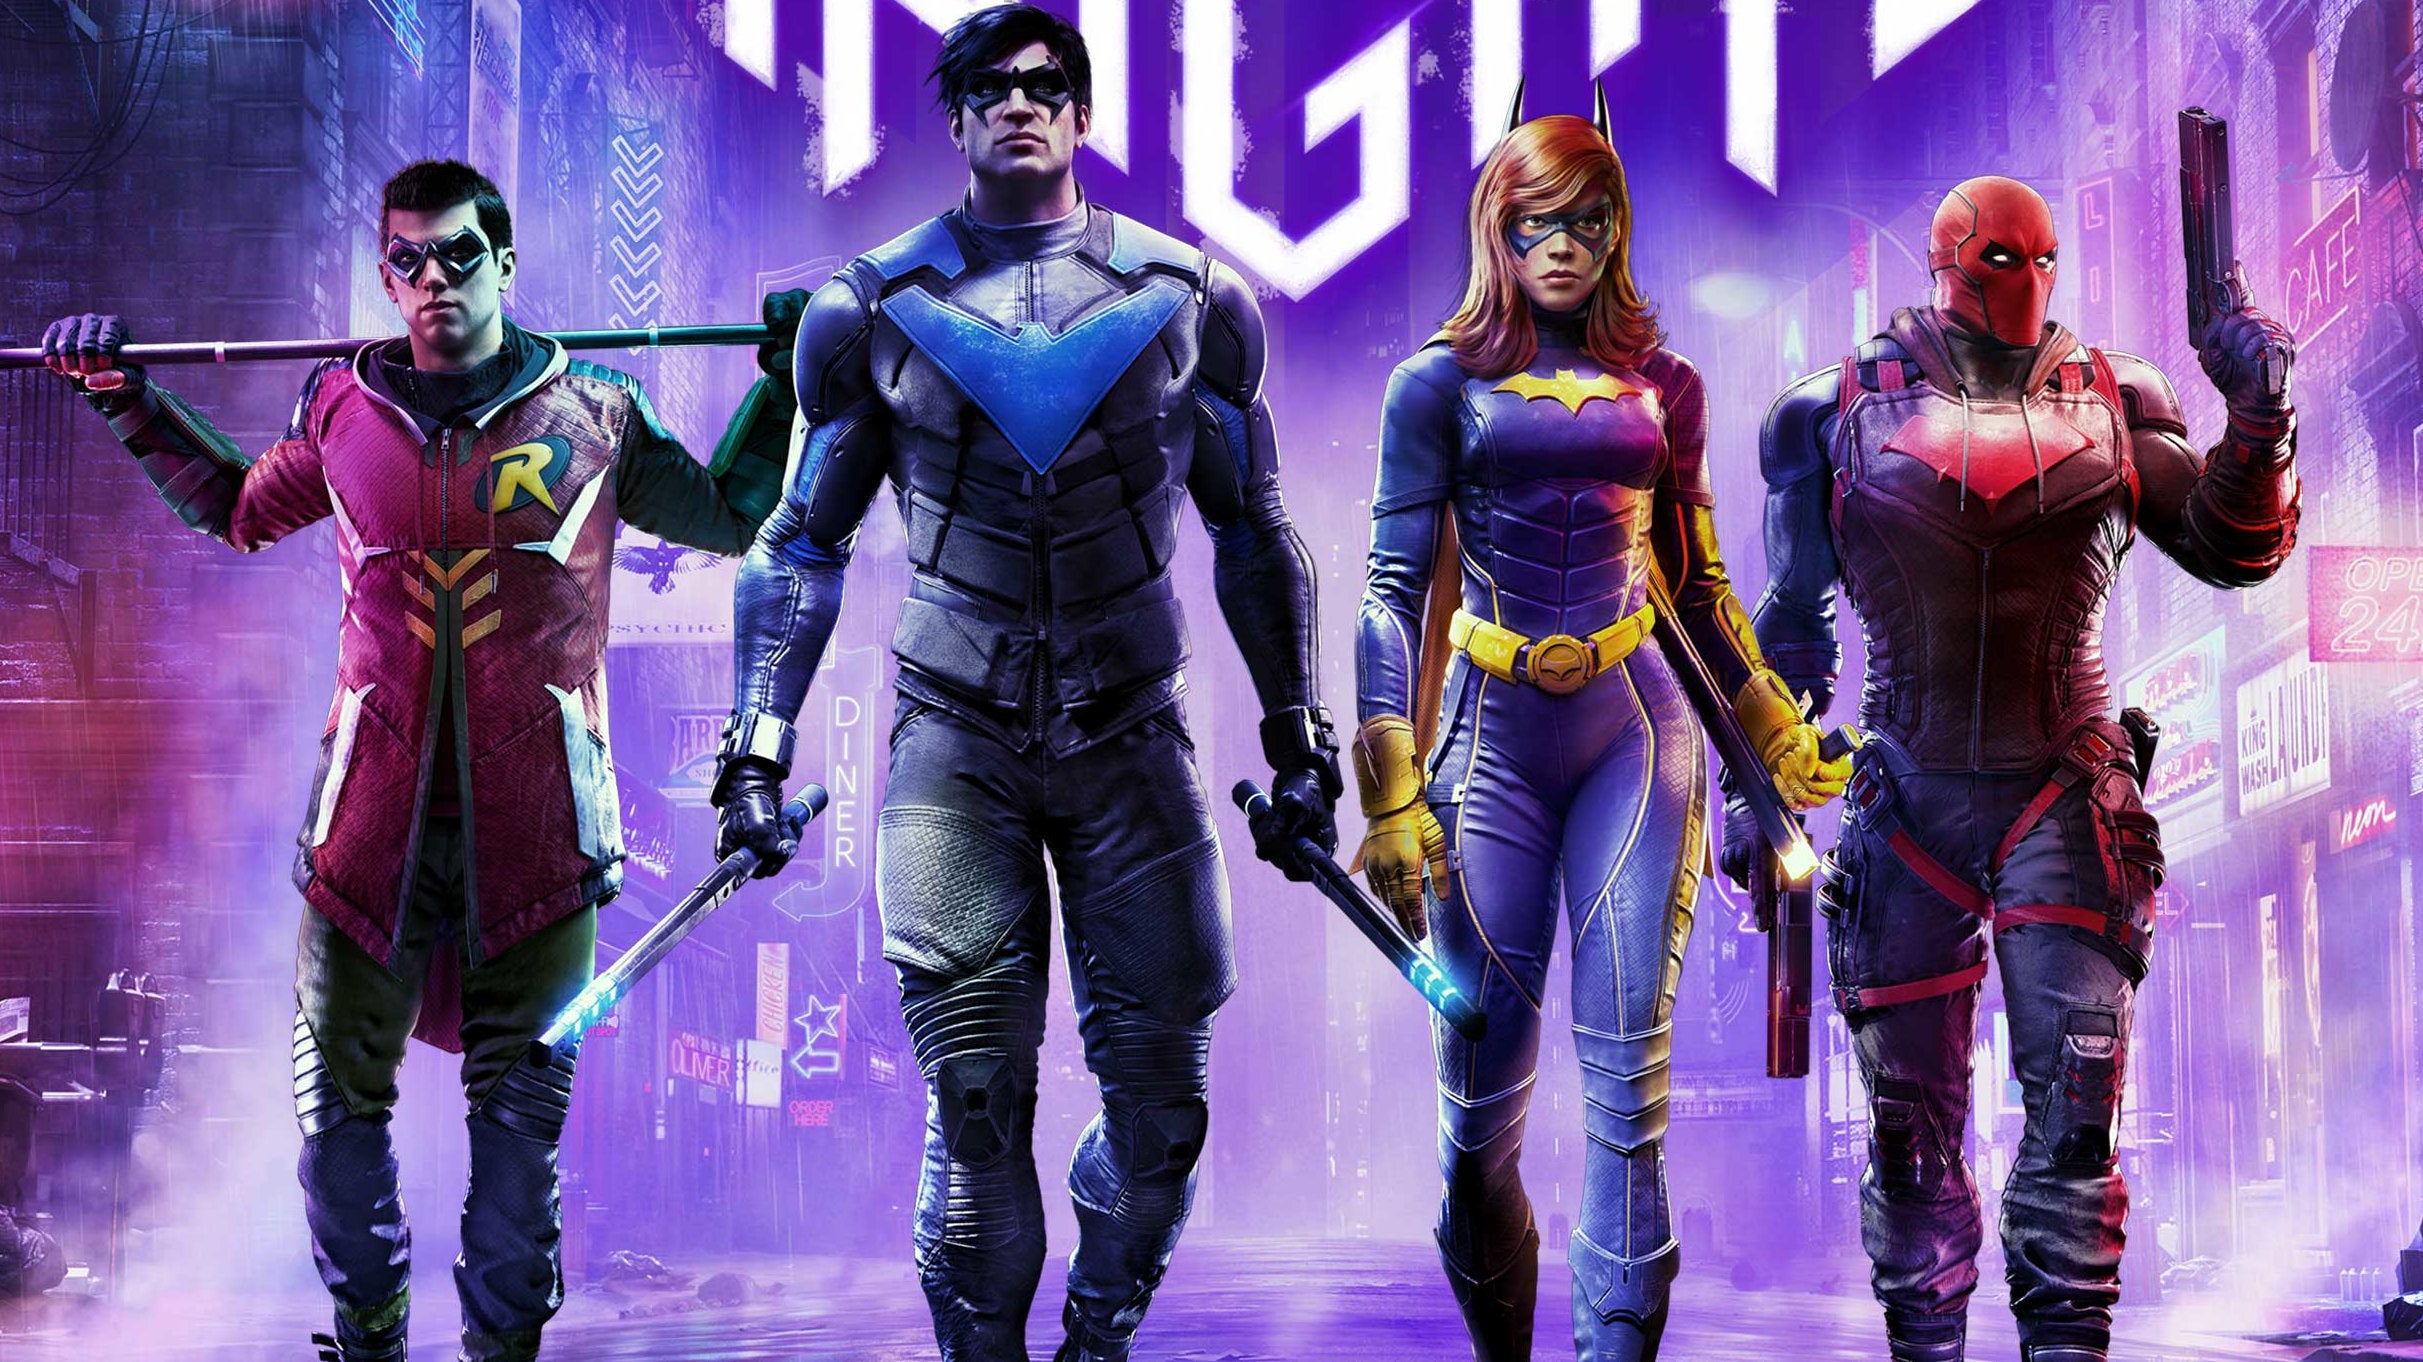 Robin, Nightwing, Batgirl, and Red Hood in the Gotham Knights key art.